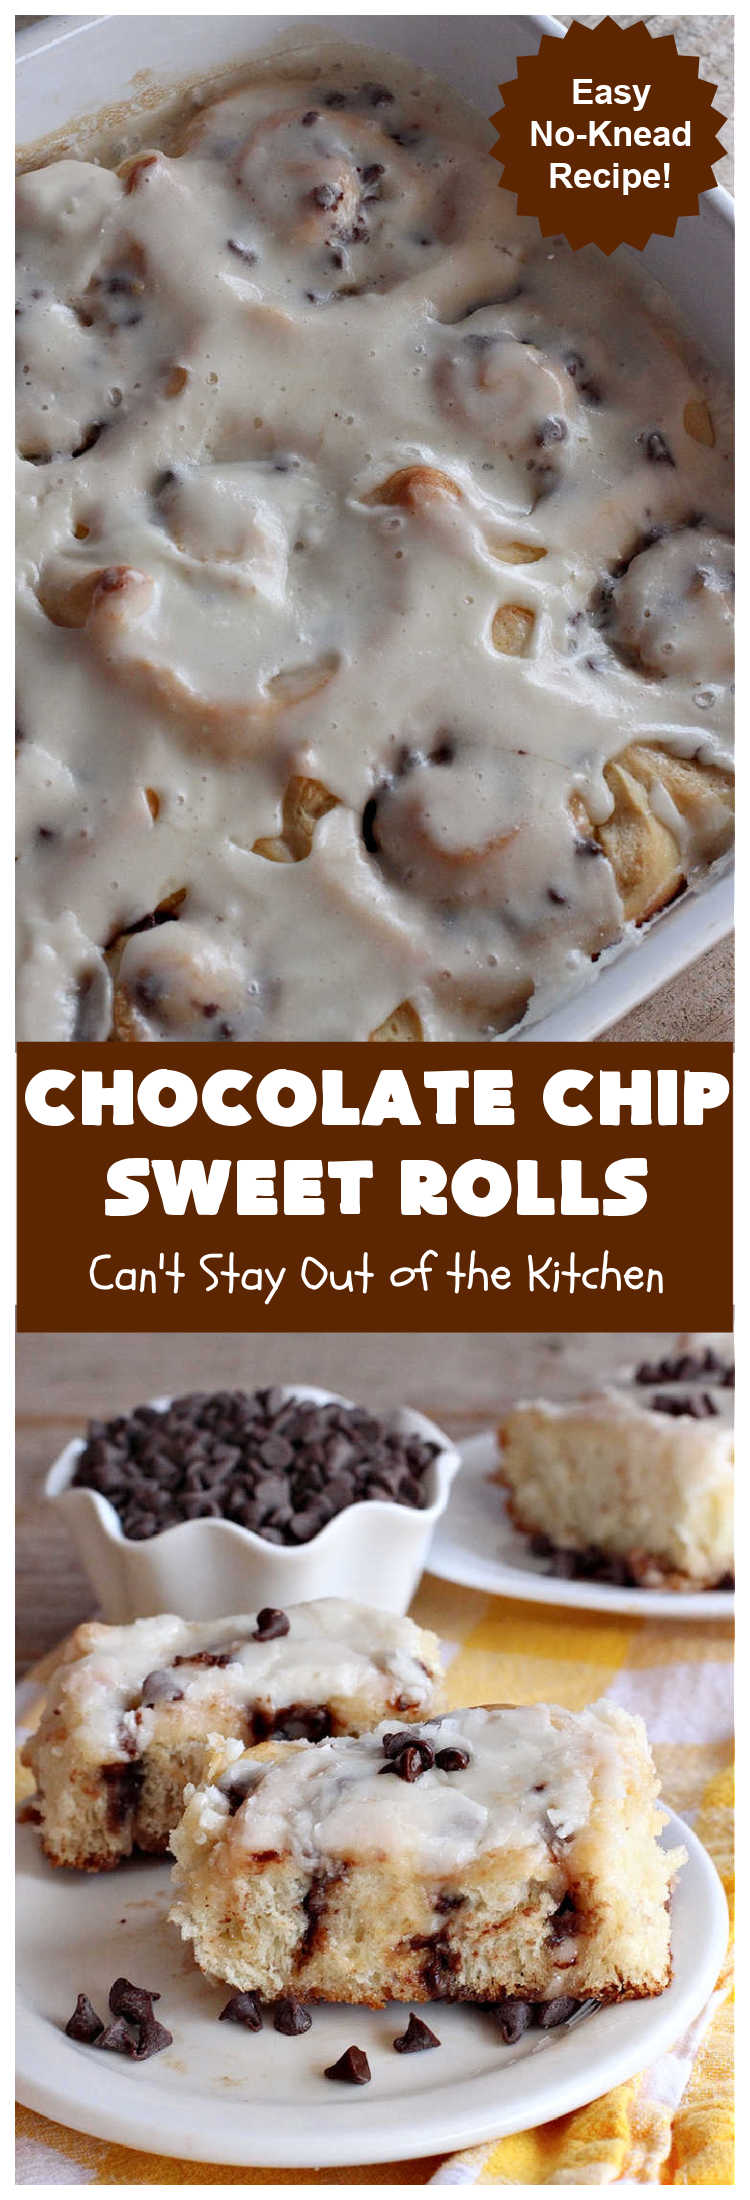 Chocolate Chip Sweet Rolls | Can't Stay Out of the Kitchen